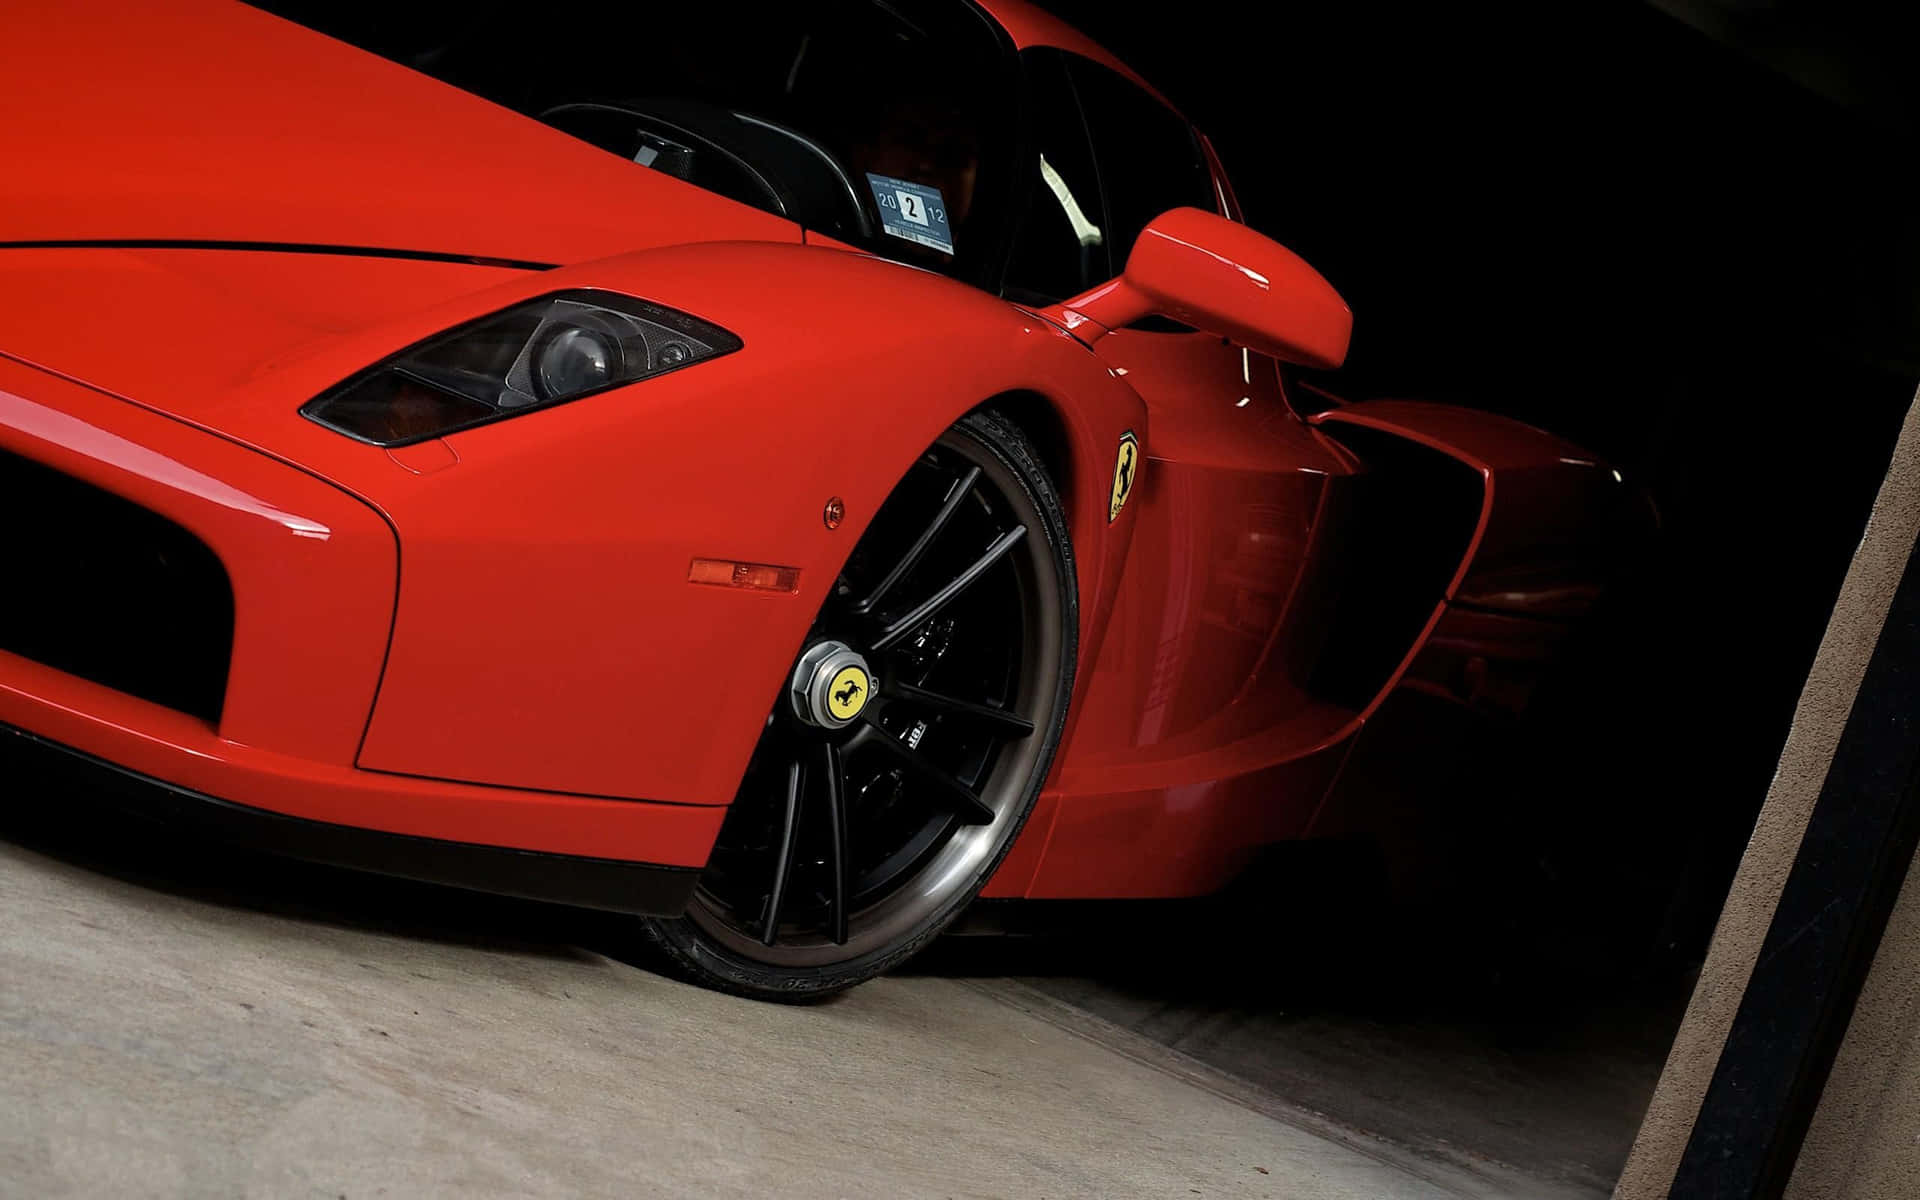 Stunning Red Ferrari Enzo on a Picturesque Road Wallpaper